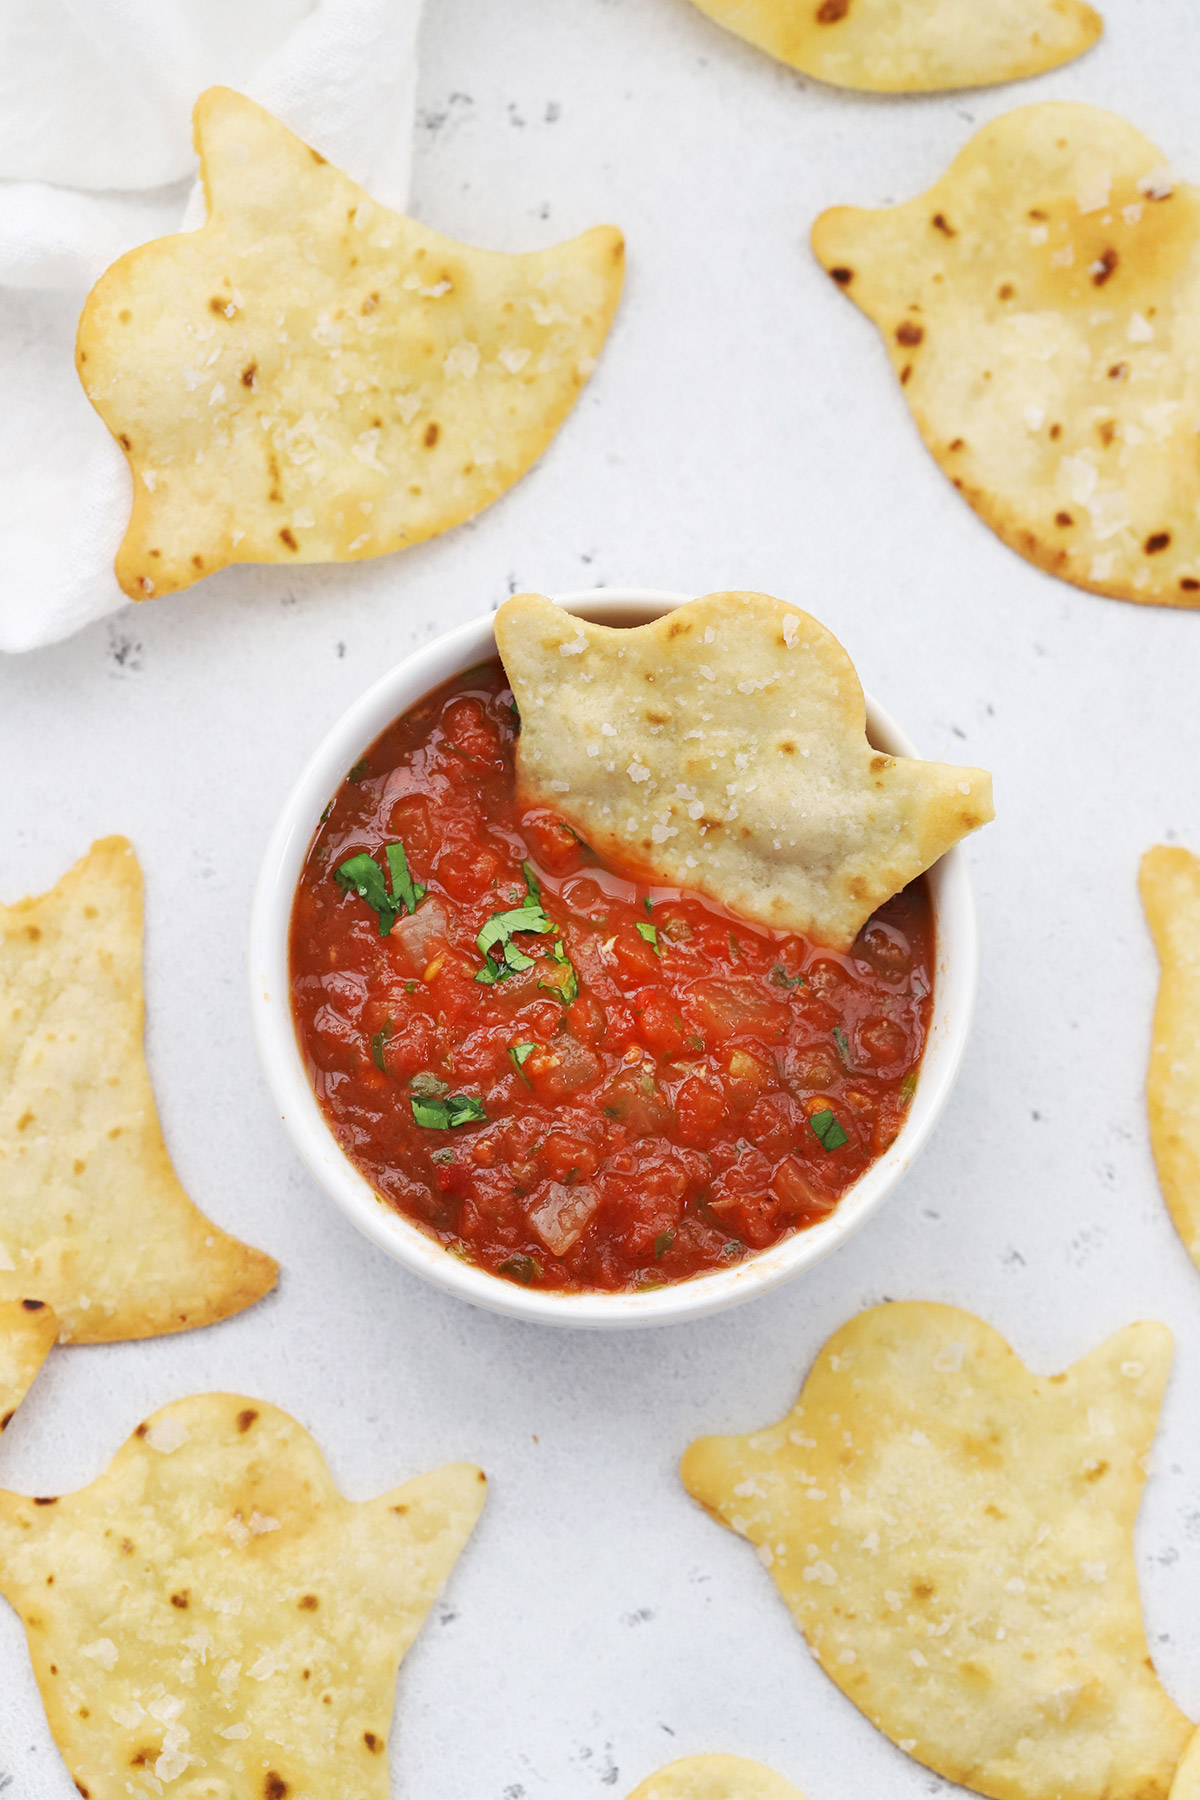 Baked Ghost Chips with Salsa